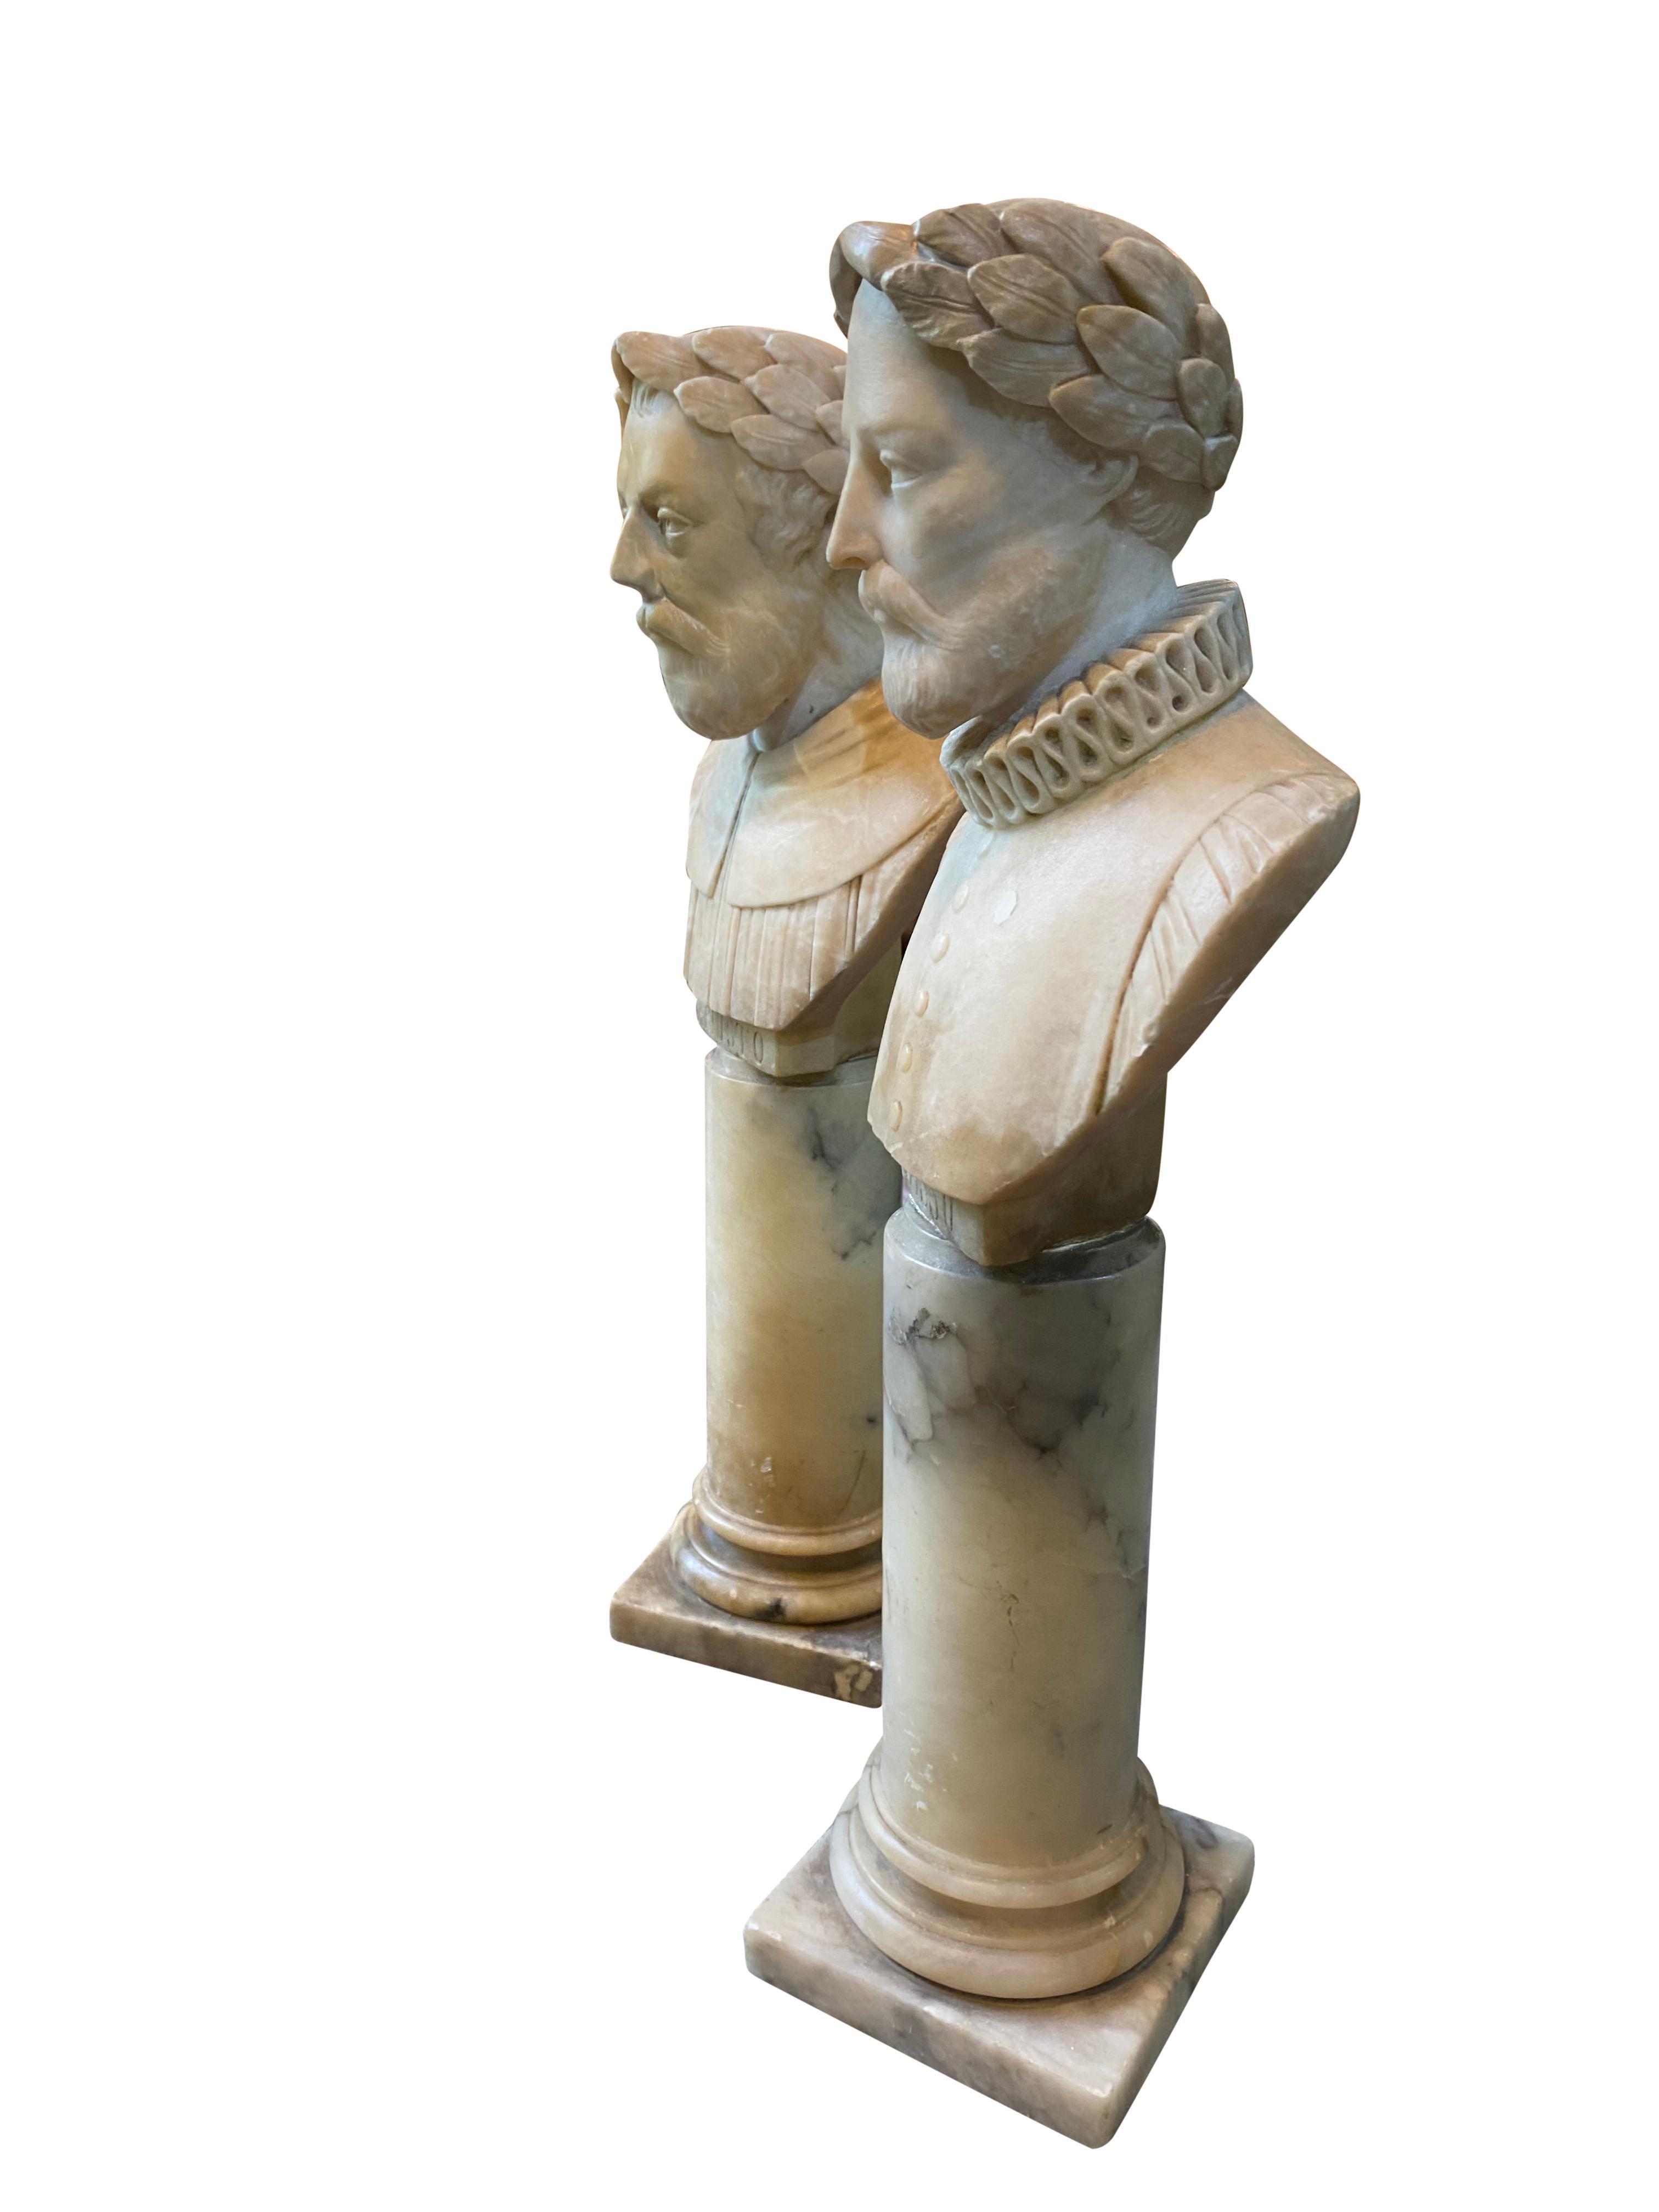 Regency Pair of 19th Century Alabaster Hand Carved Busts of Ariosto and Tasso